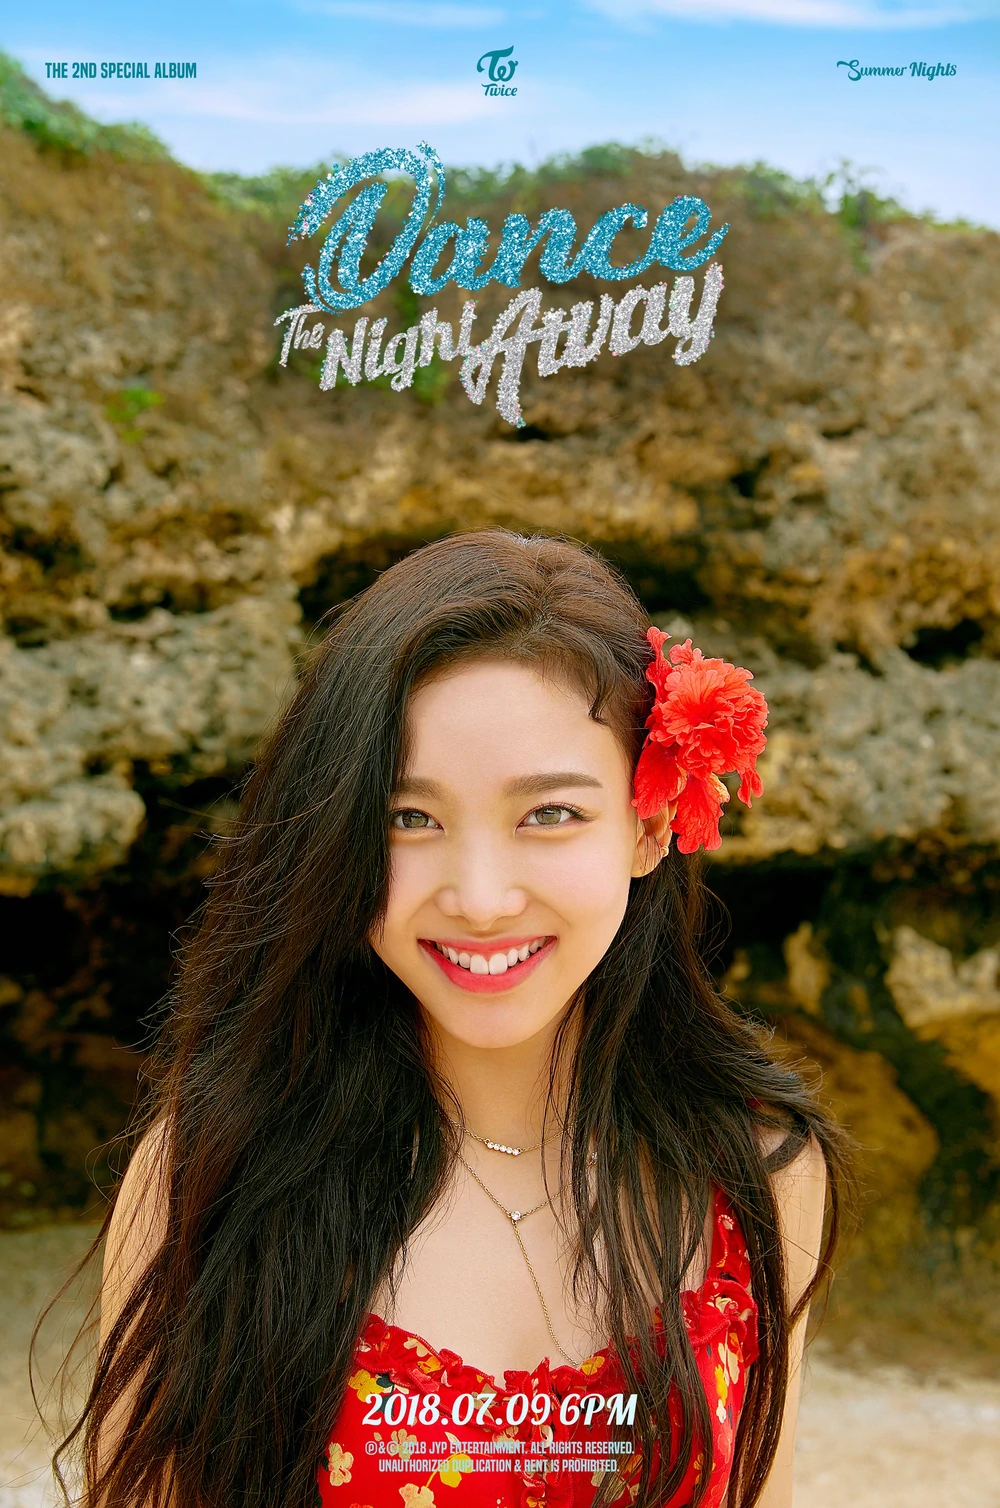 Twice Summer Nights Nayeon Concept Teaser Picture Image Photo Kpop K-Concept 3